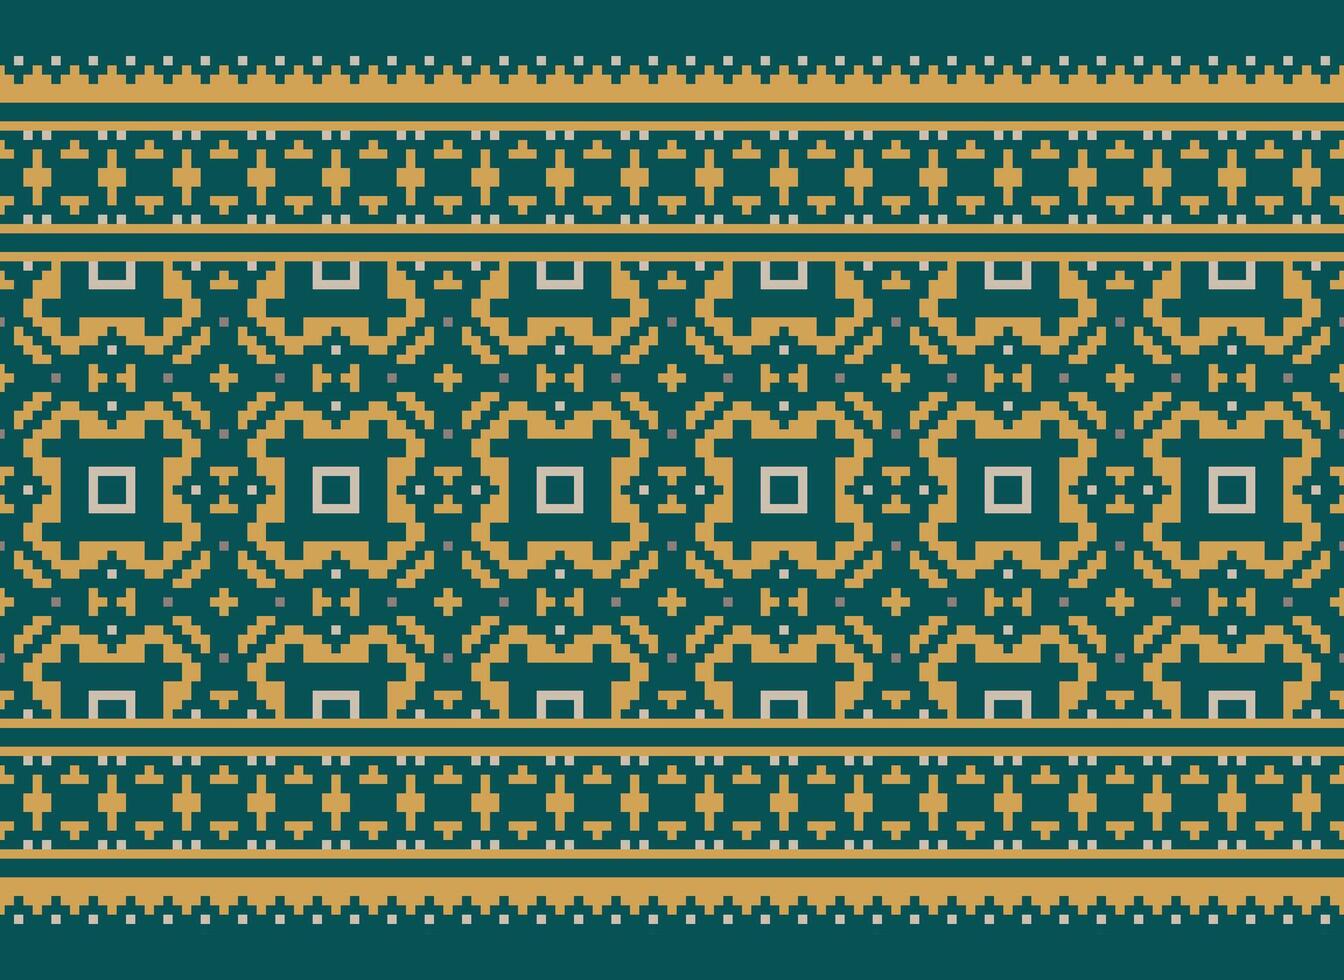 Beautiful floral cross stitch pattern.geometric ethnic oriental pattern traditional background.Aztec style abstract vector illustration.design for texture,fabric,clothing,wrapping,decoration,carpet.